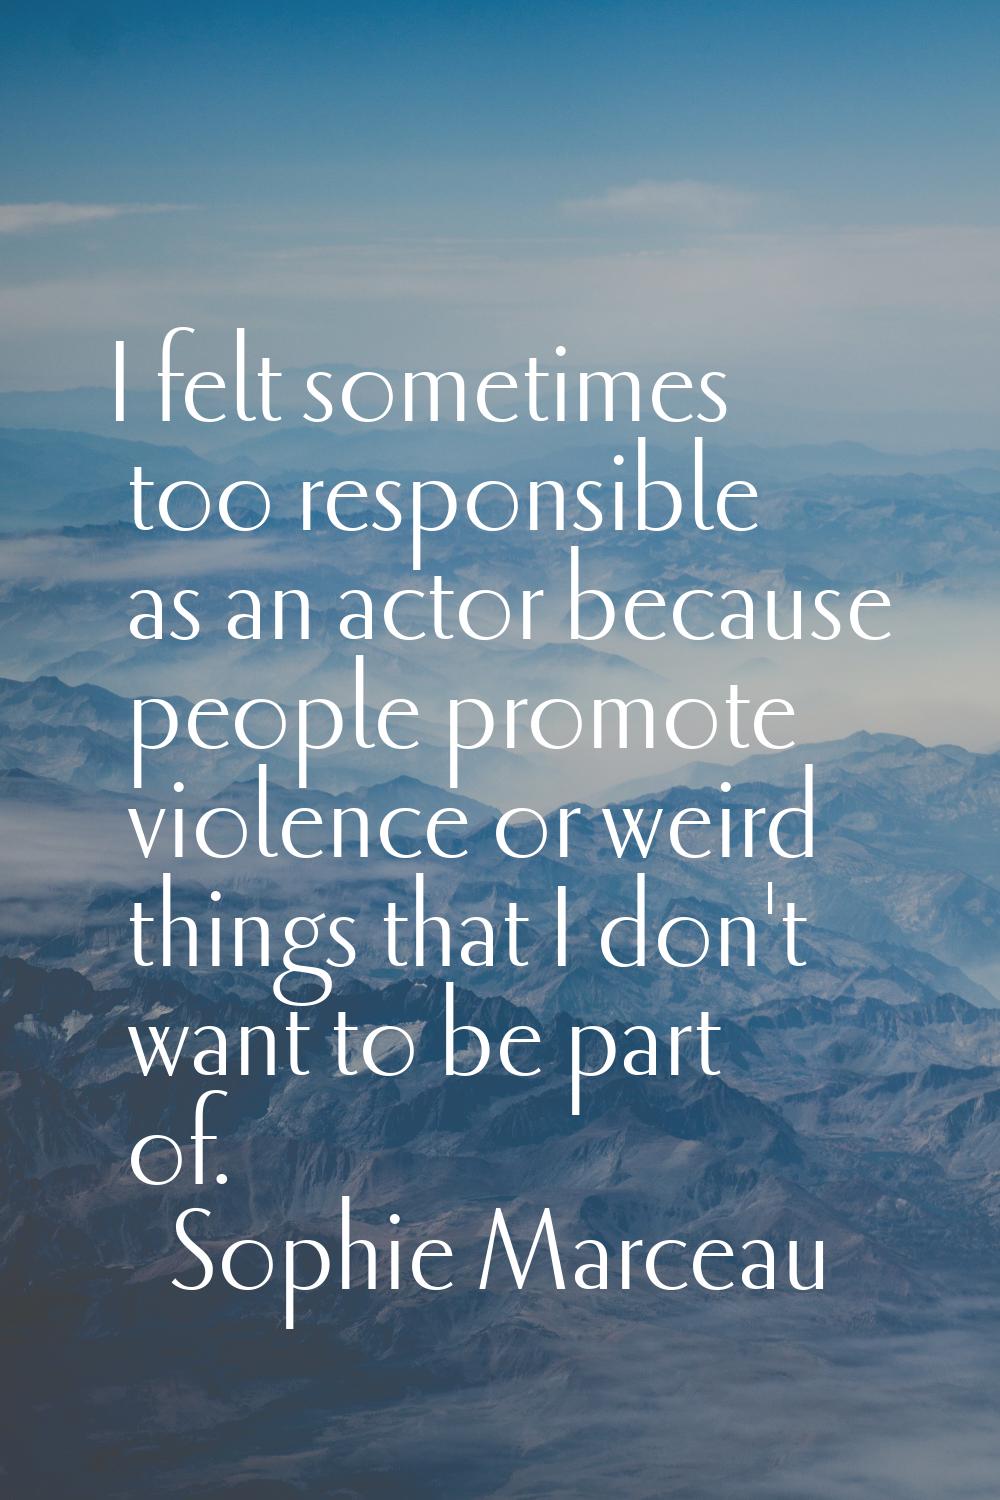 I felt sometimes too responsible as an actor because people promote violence or weird things that I